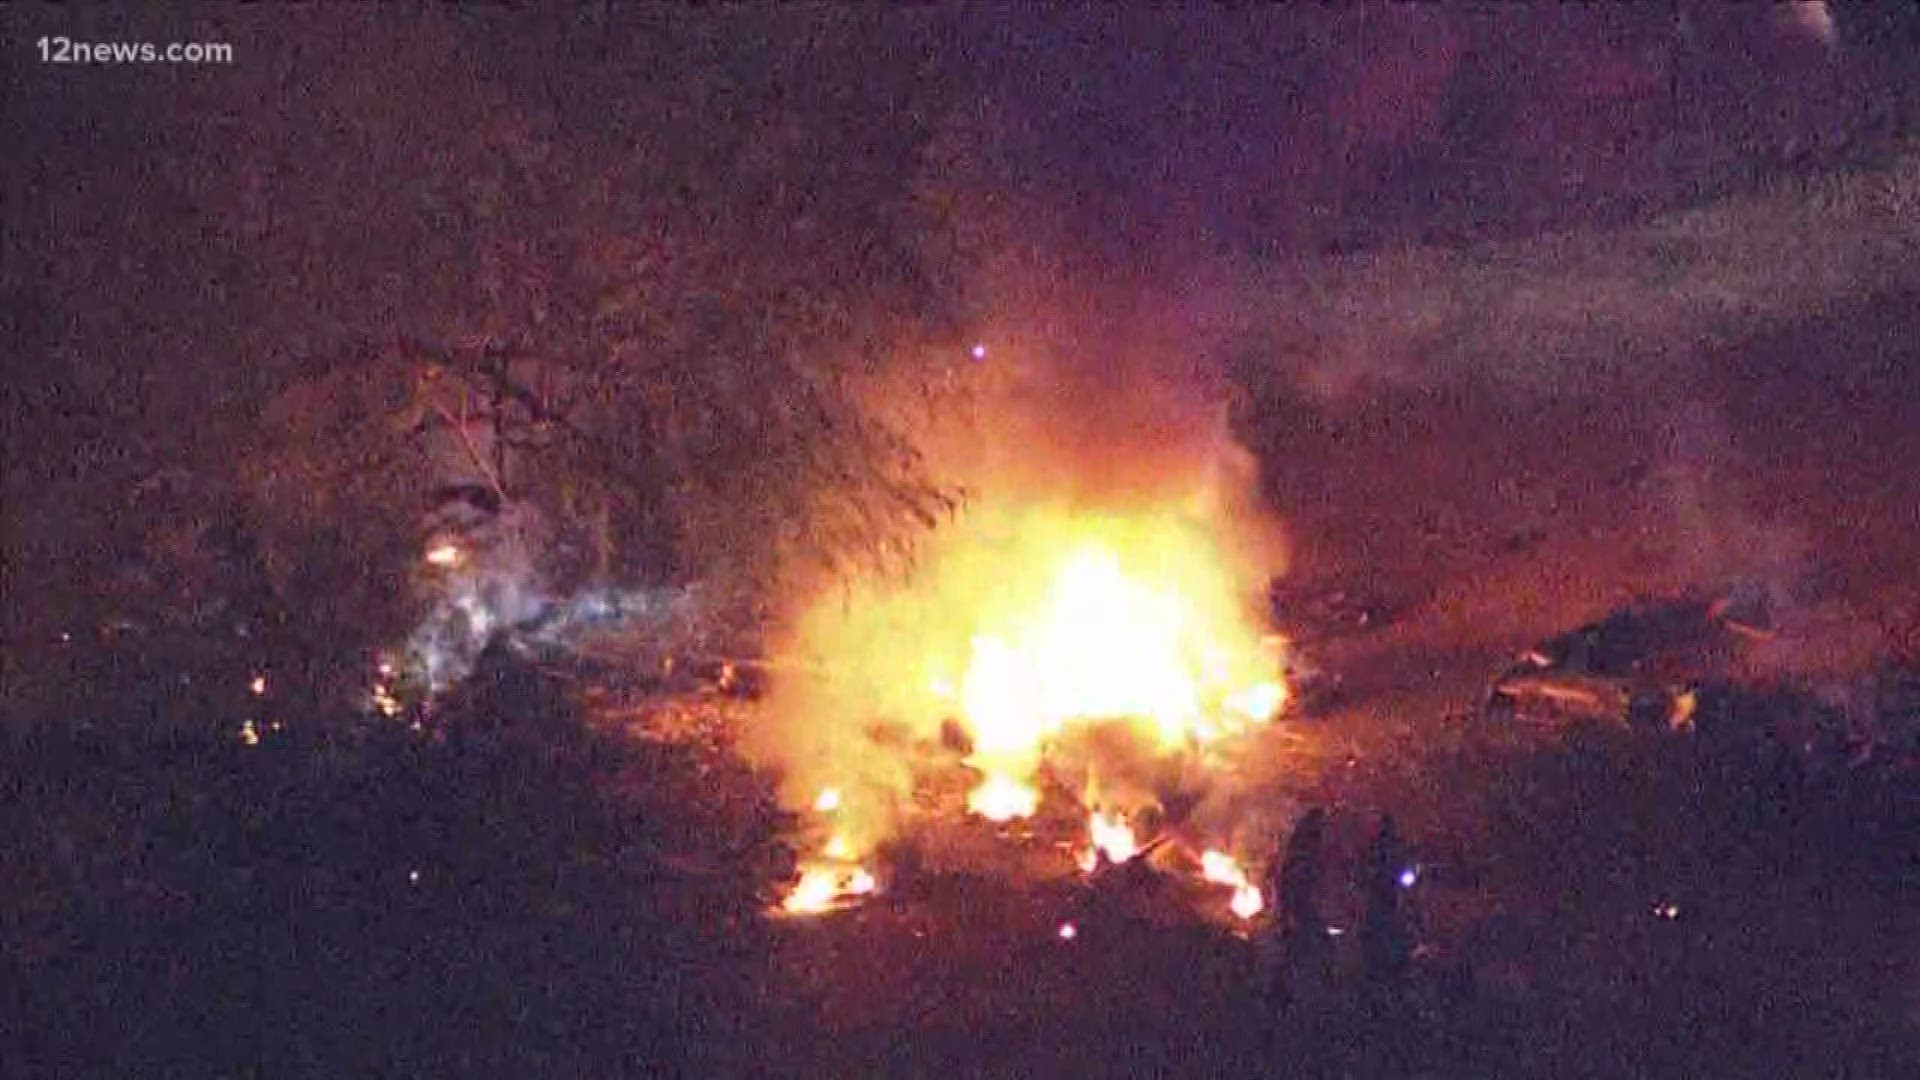 Six people are dead after a plane crash near the TPC golf course Monday night in Scottsdale.